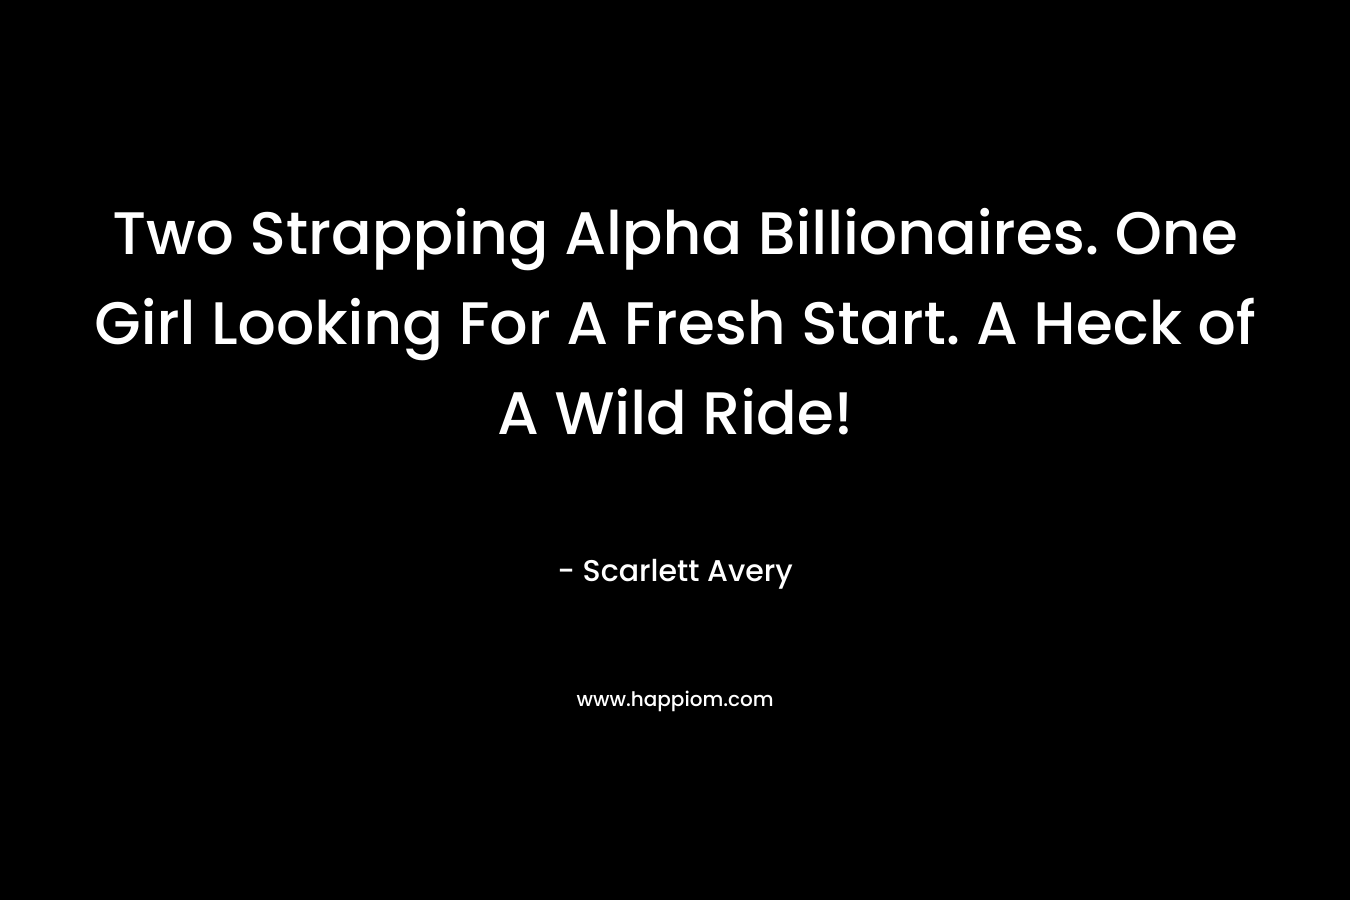 Two Strapping Alpha Billionaires. One Girl Looking For A Fresh Start. A Heck of A Wild Ride! – Scarlett Avery